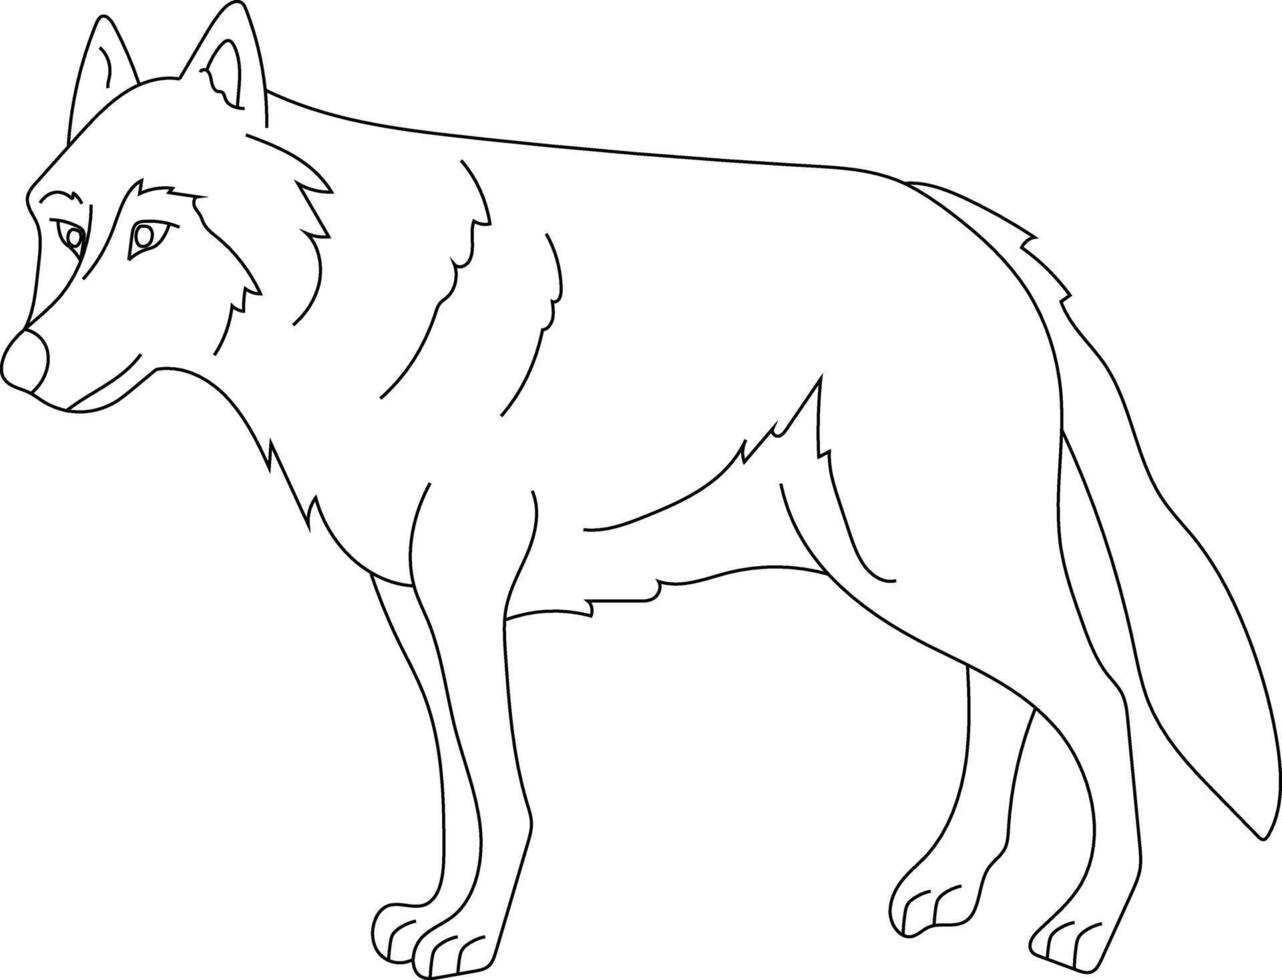 Outline Wolf Clipart. Doodle Animals Clipart. Cartoon Wild Animals Clipart for Lovers of Wildlife vector